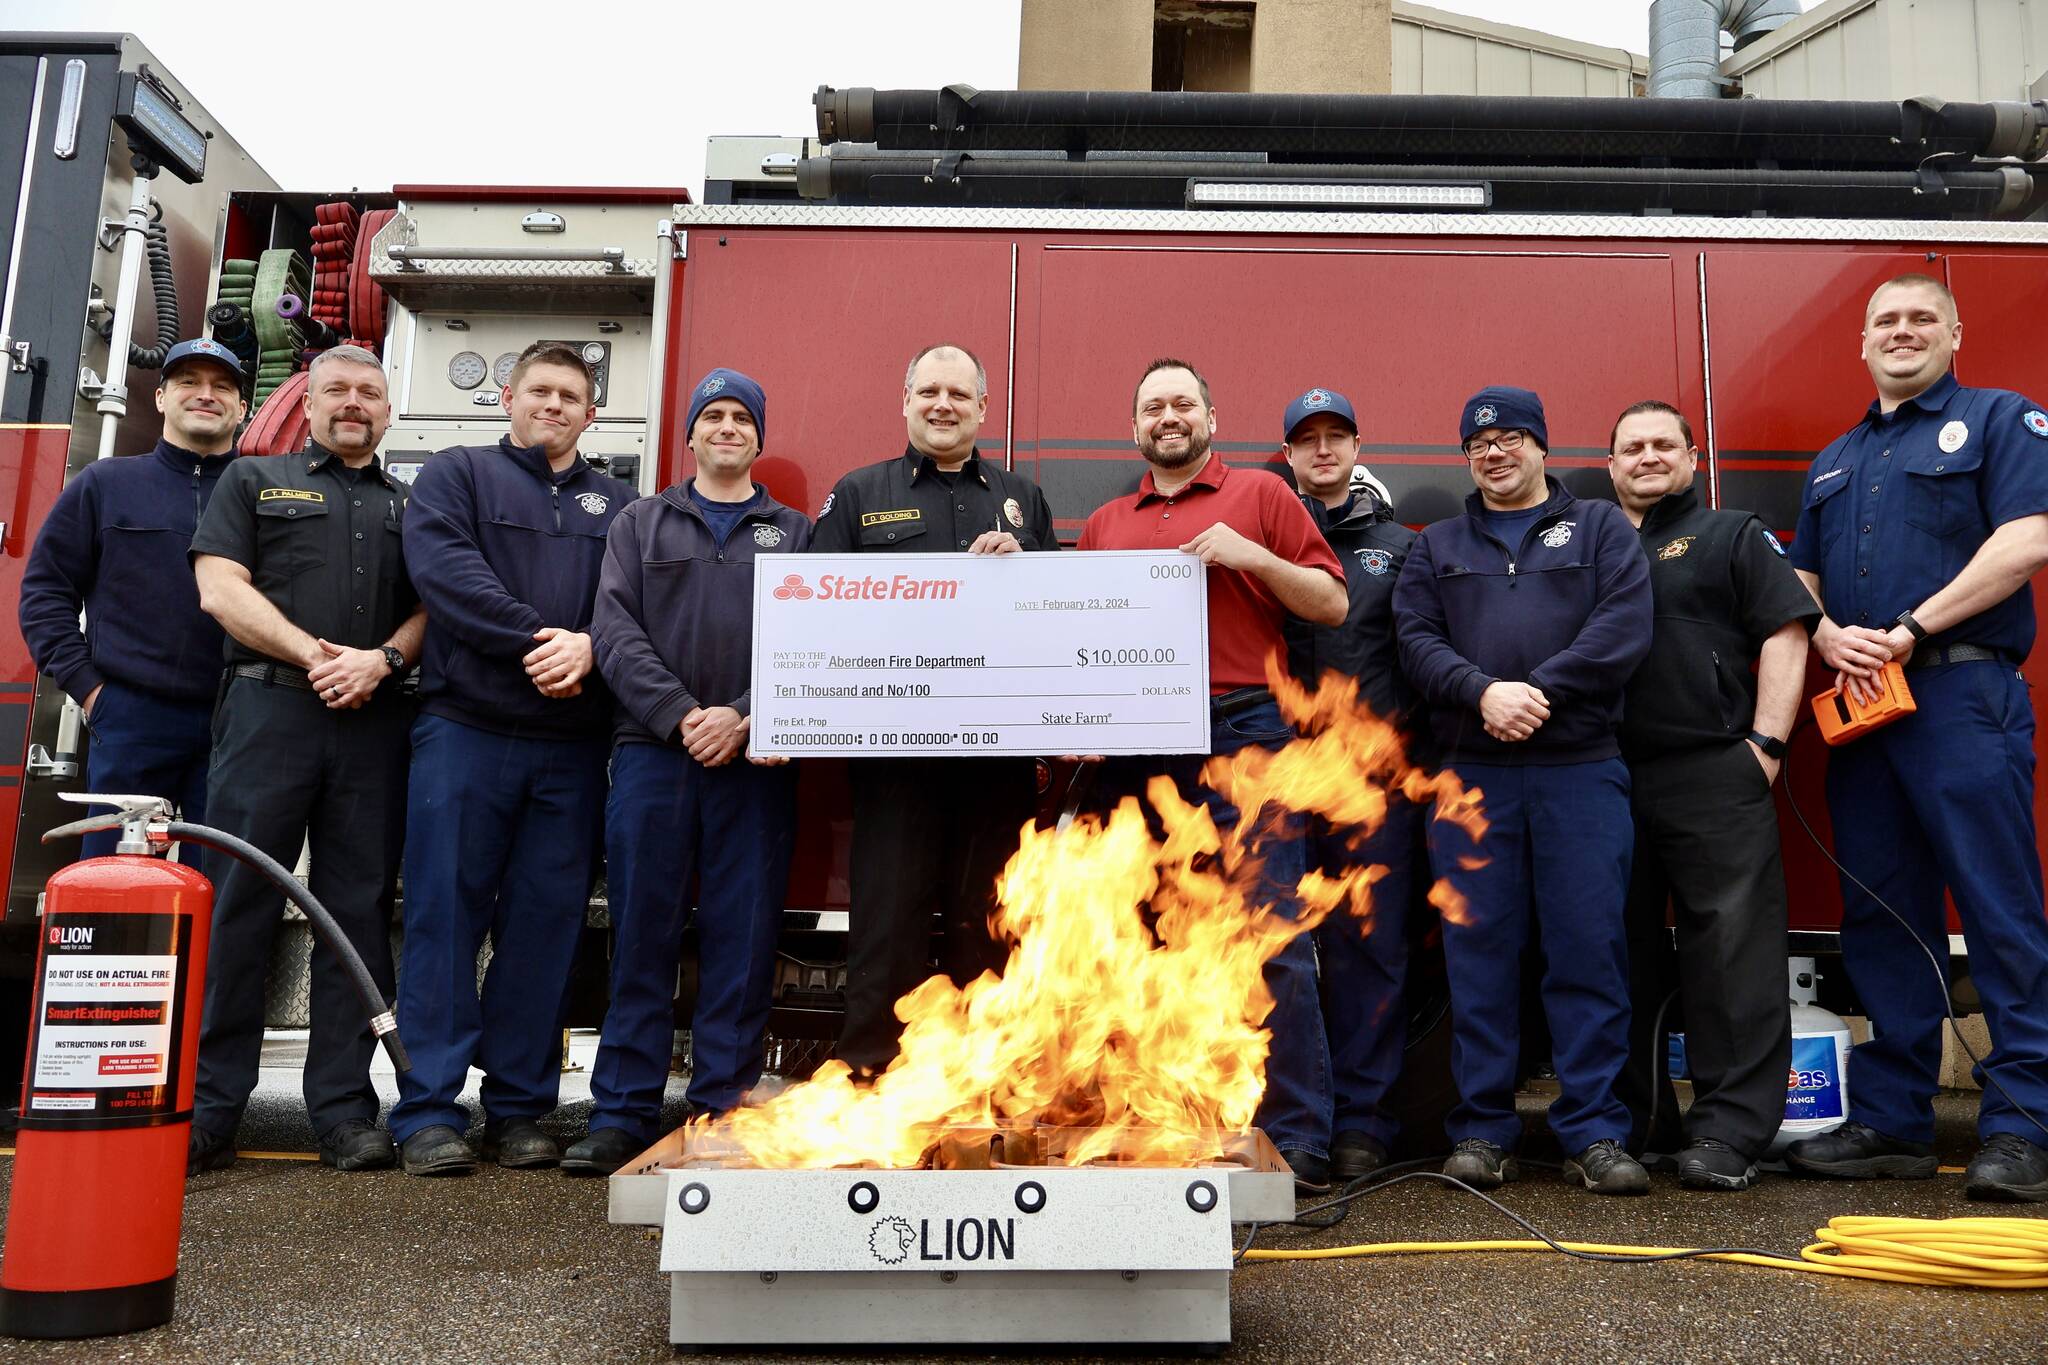 The Aberdeen Fire Department received a $10,000 grant from State Farm for a fire extinguisher training aid, on fire in the foreground. (Michael S. Lockett / The Daily World)